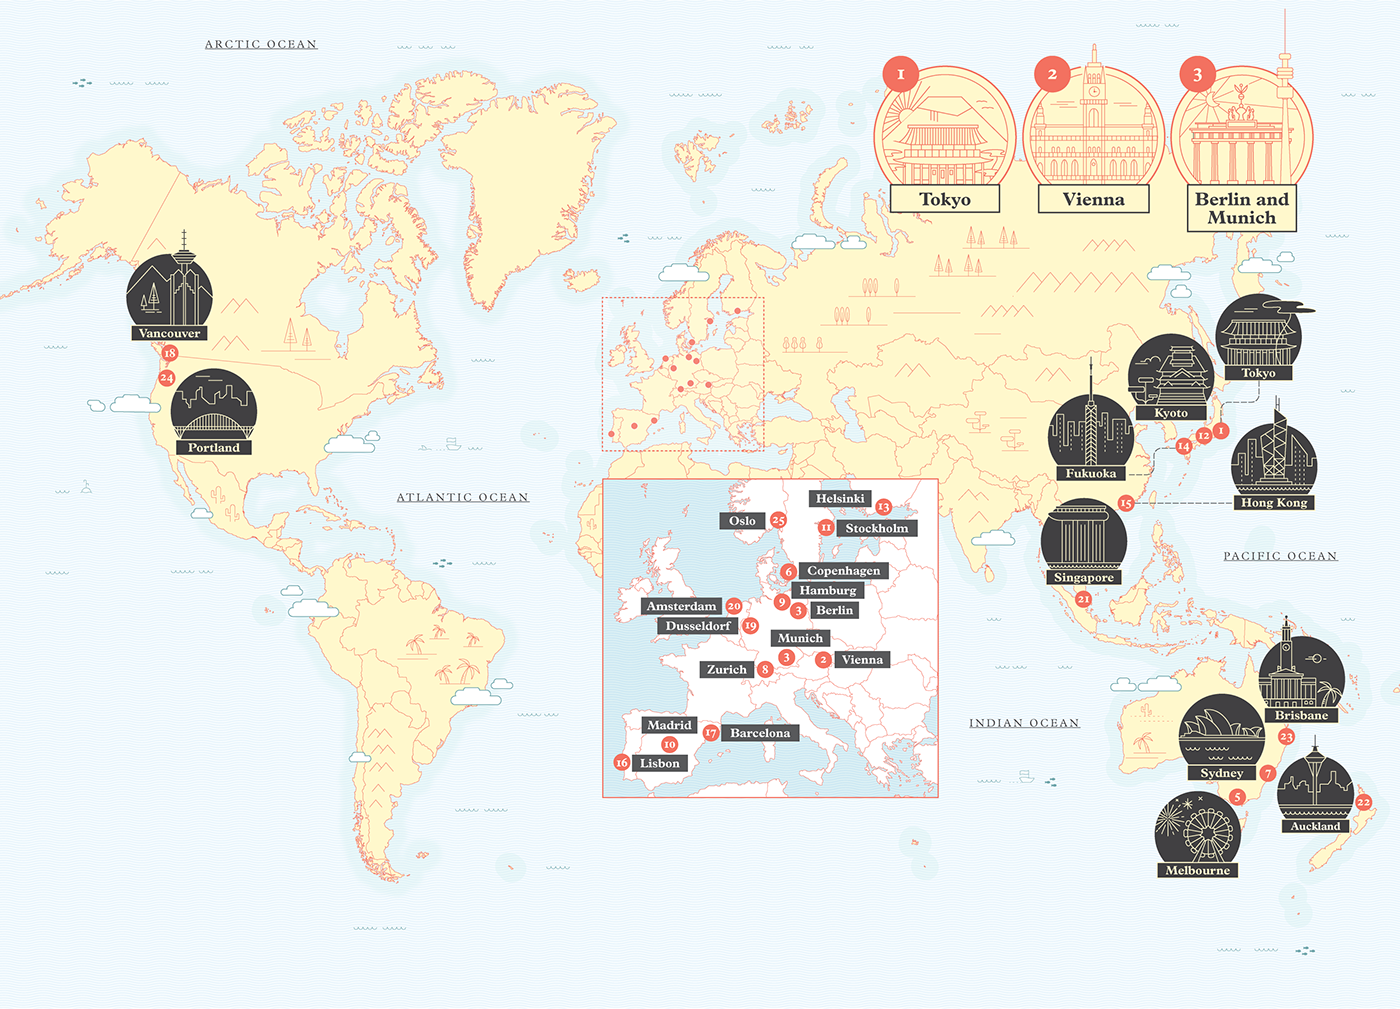 map mapillustration Cities to25 Monocle monoclemagazine editorialdesign infographic icons